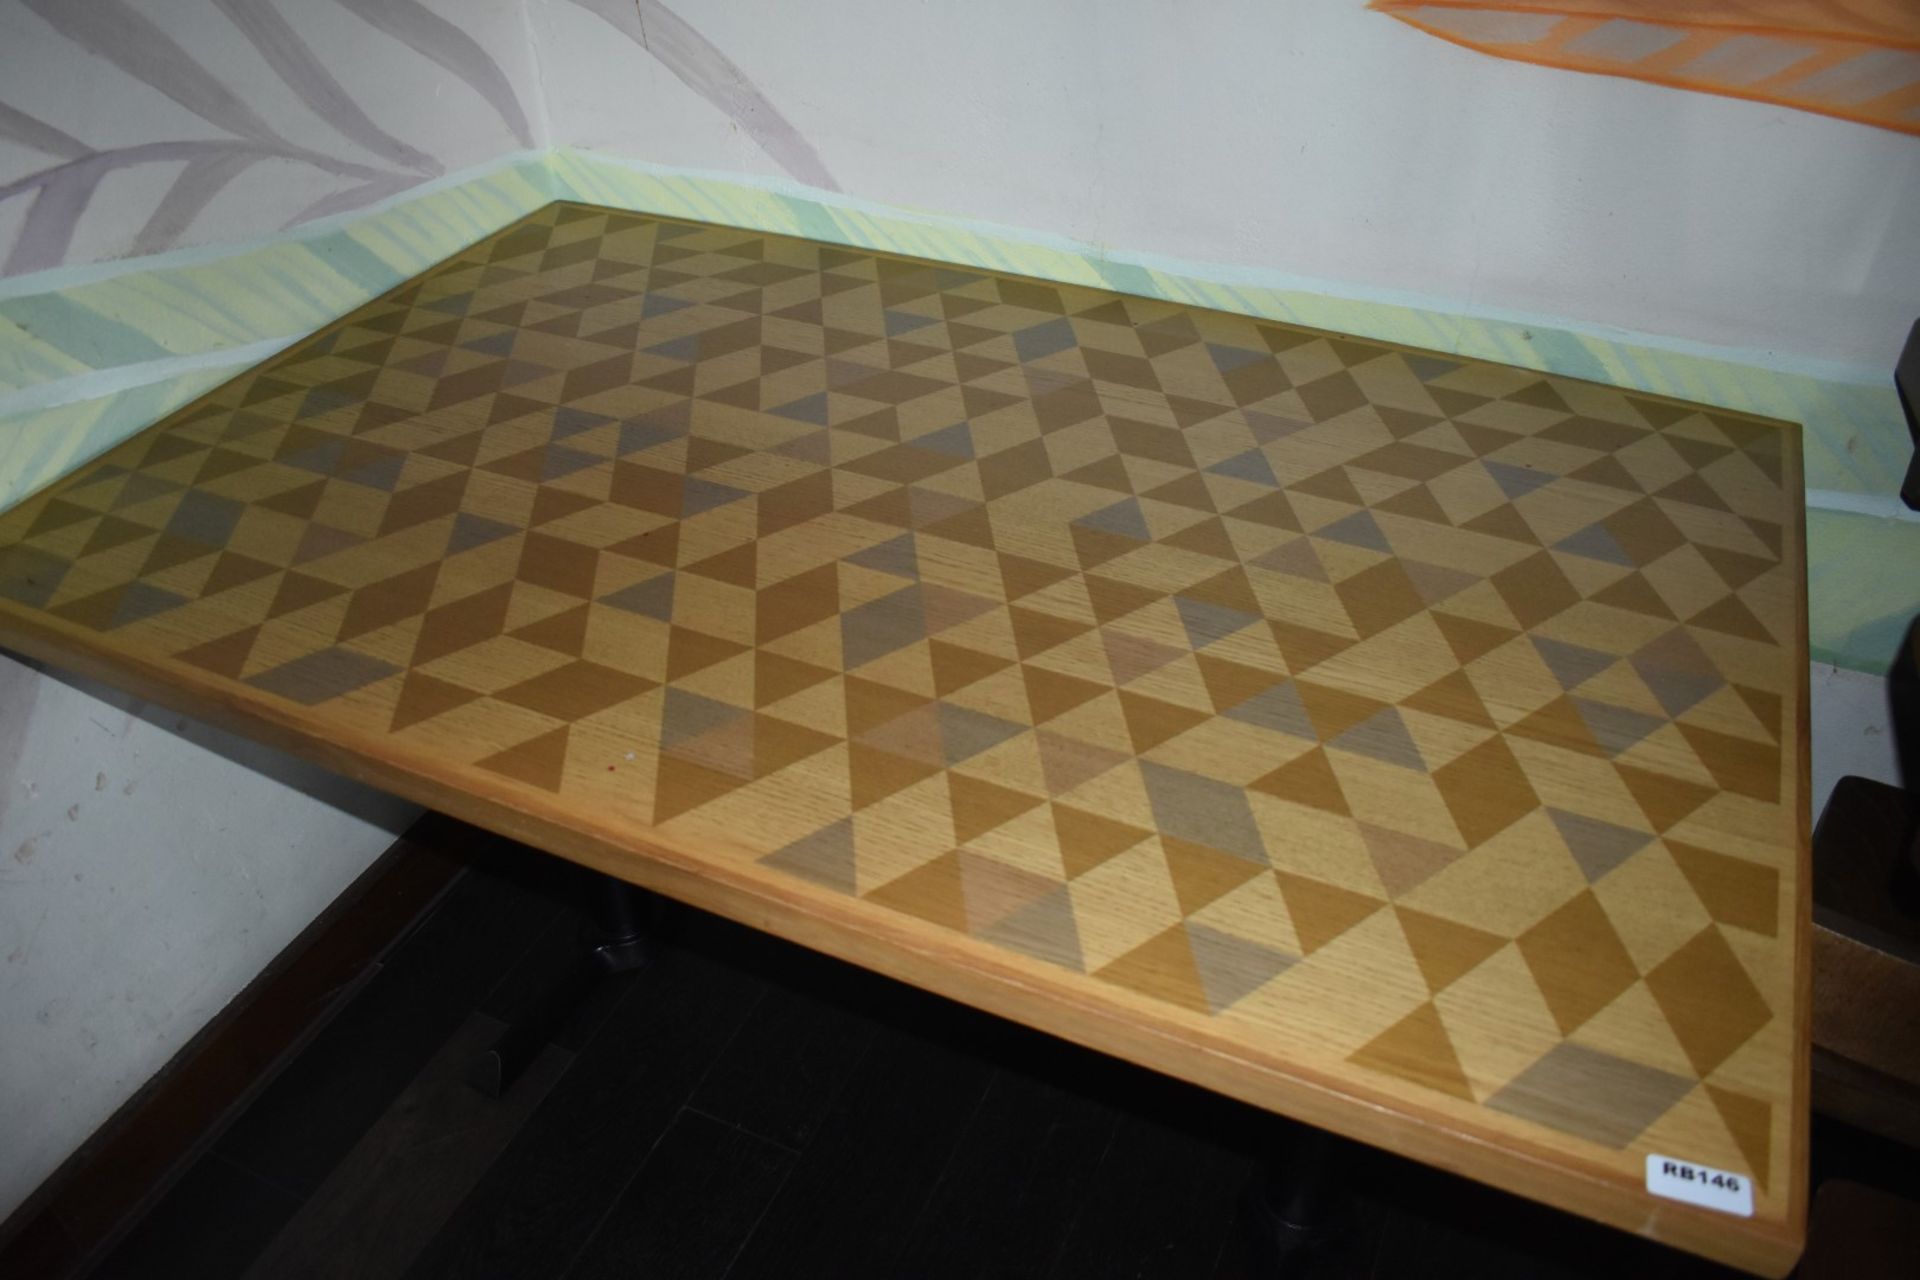 1 x Large Dining Table With Wooden Top, Cast Metal Base and Geometric Design - Size H77 x W140 x D90